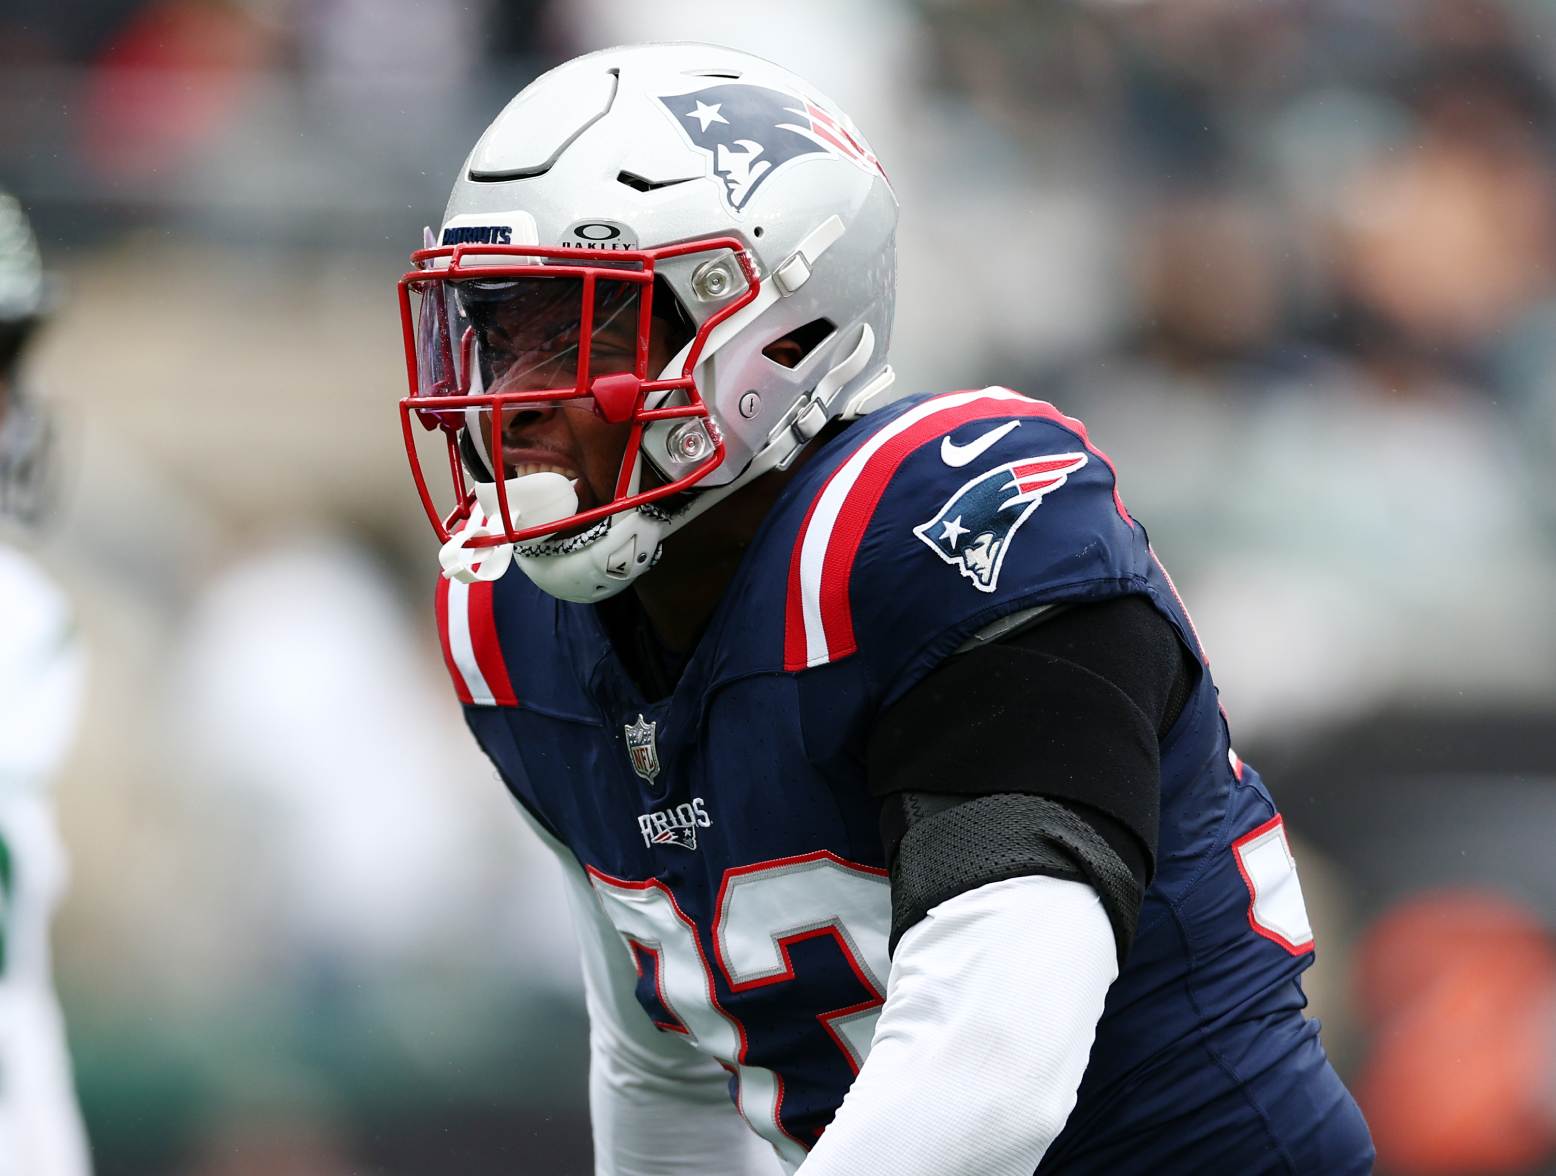 EAST RUTHERFORD, NEW JERSEY - SEPTEMBER 24: Anfernee Jennings #33 of the New England Patriots celebrates a stop in the first quarter of a game against the New York Jets at MetLife Stadium on September 24, 2023 in East Rutherford, New Jersey. (Photo by Elsa/Getty Images)